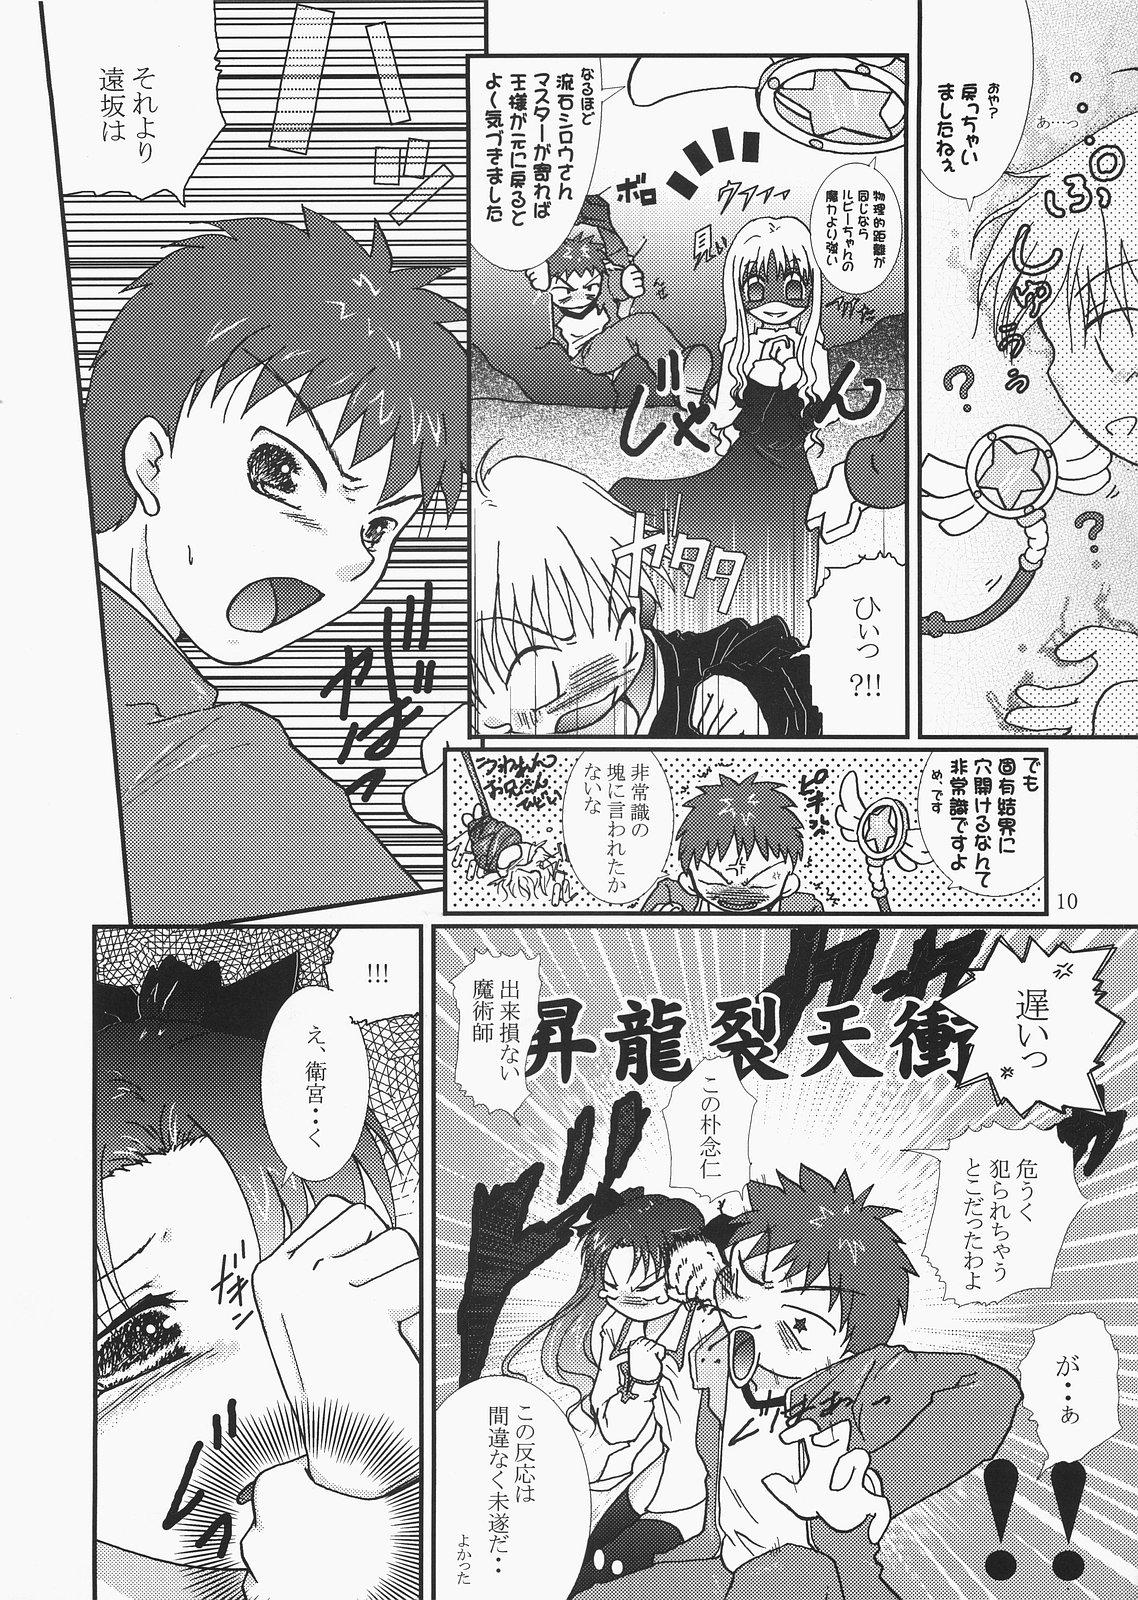 Transex Magical Bunny Nyan 4 - Fate hollow ataraxia Missionary Porn - Page 9